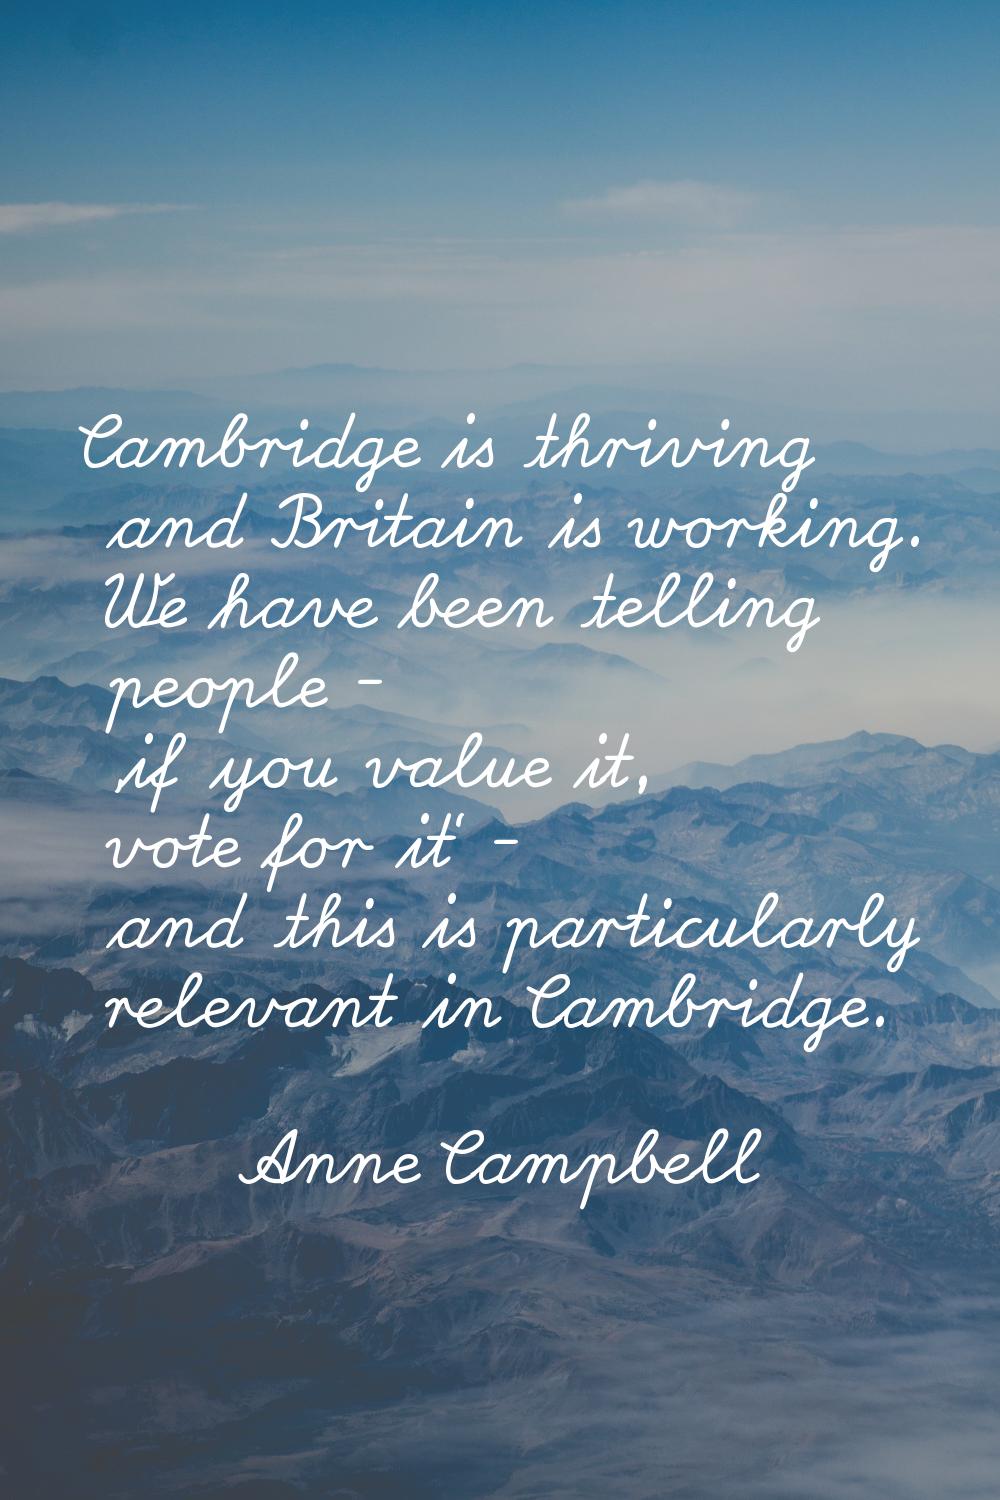 Cambridge is thriving and Britain is working. We have been telling people - 'if you value it, vote 